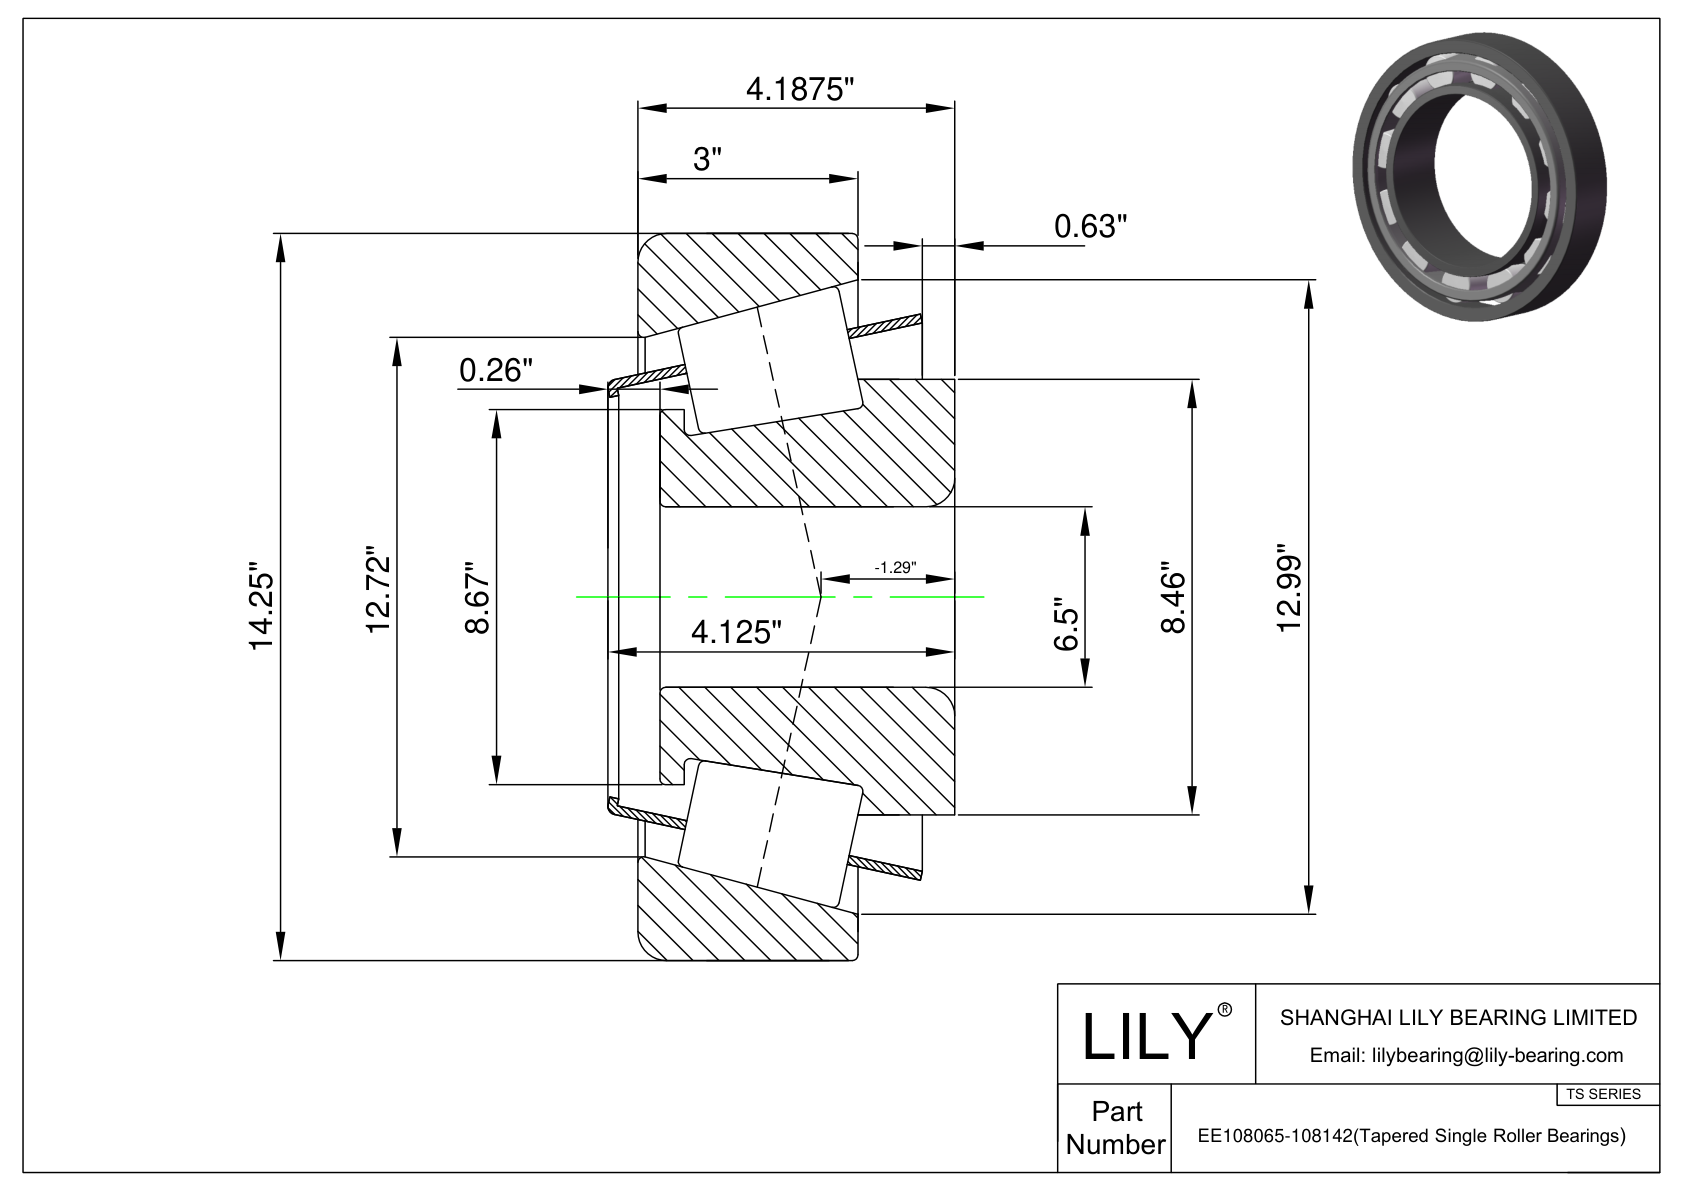 EE108065-108142 TS (Tapered Single Roller Bearings) (Imperial) cad drawing